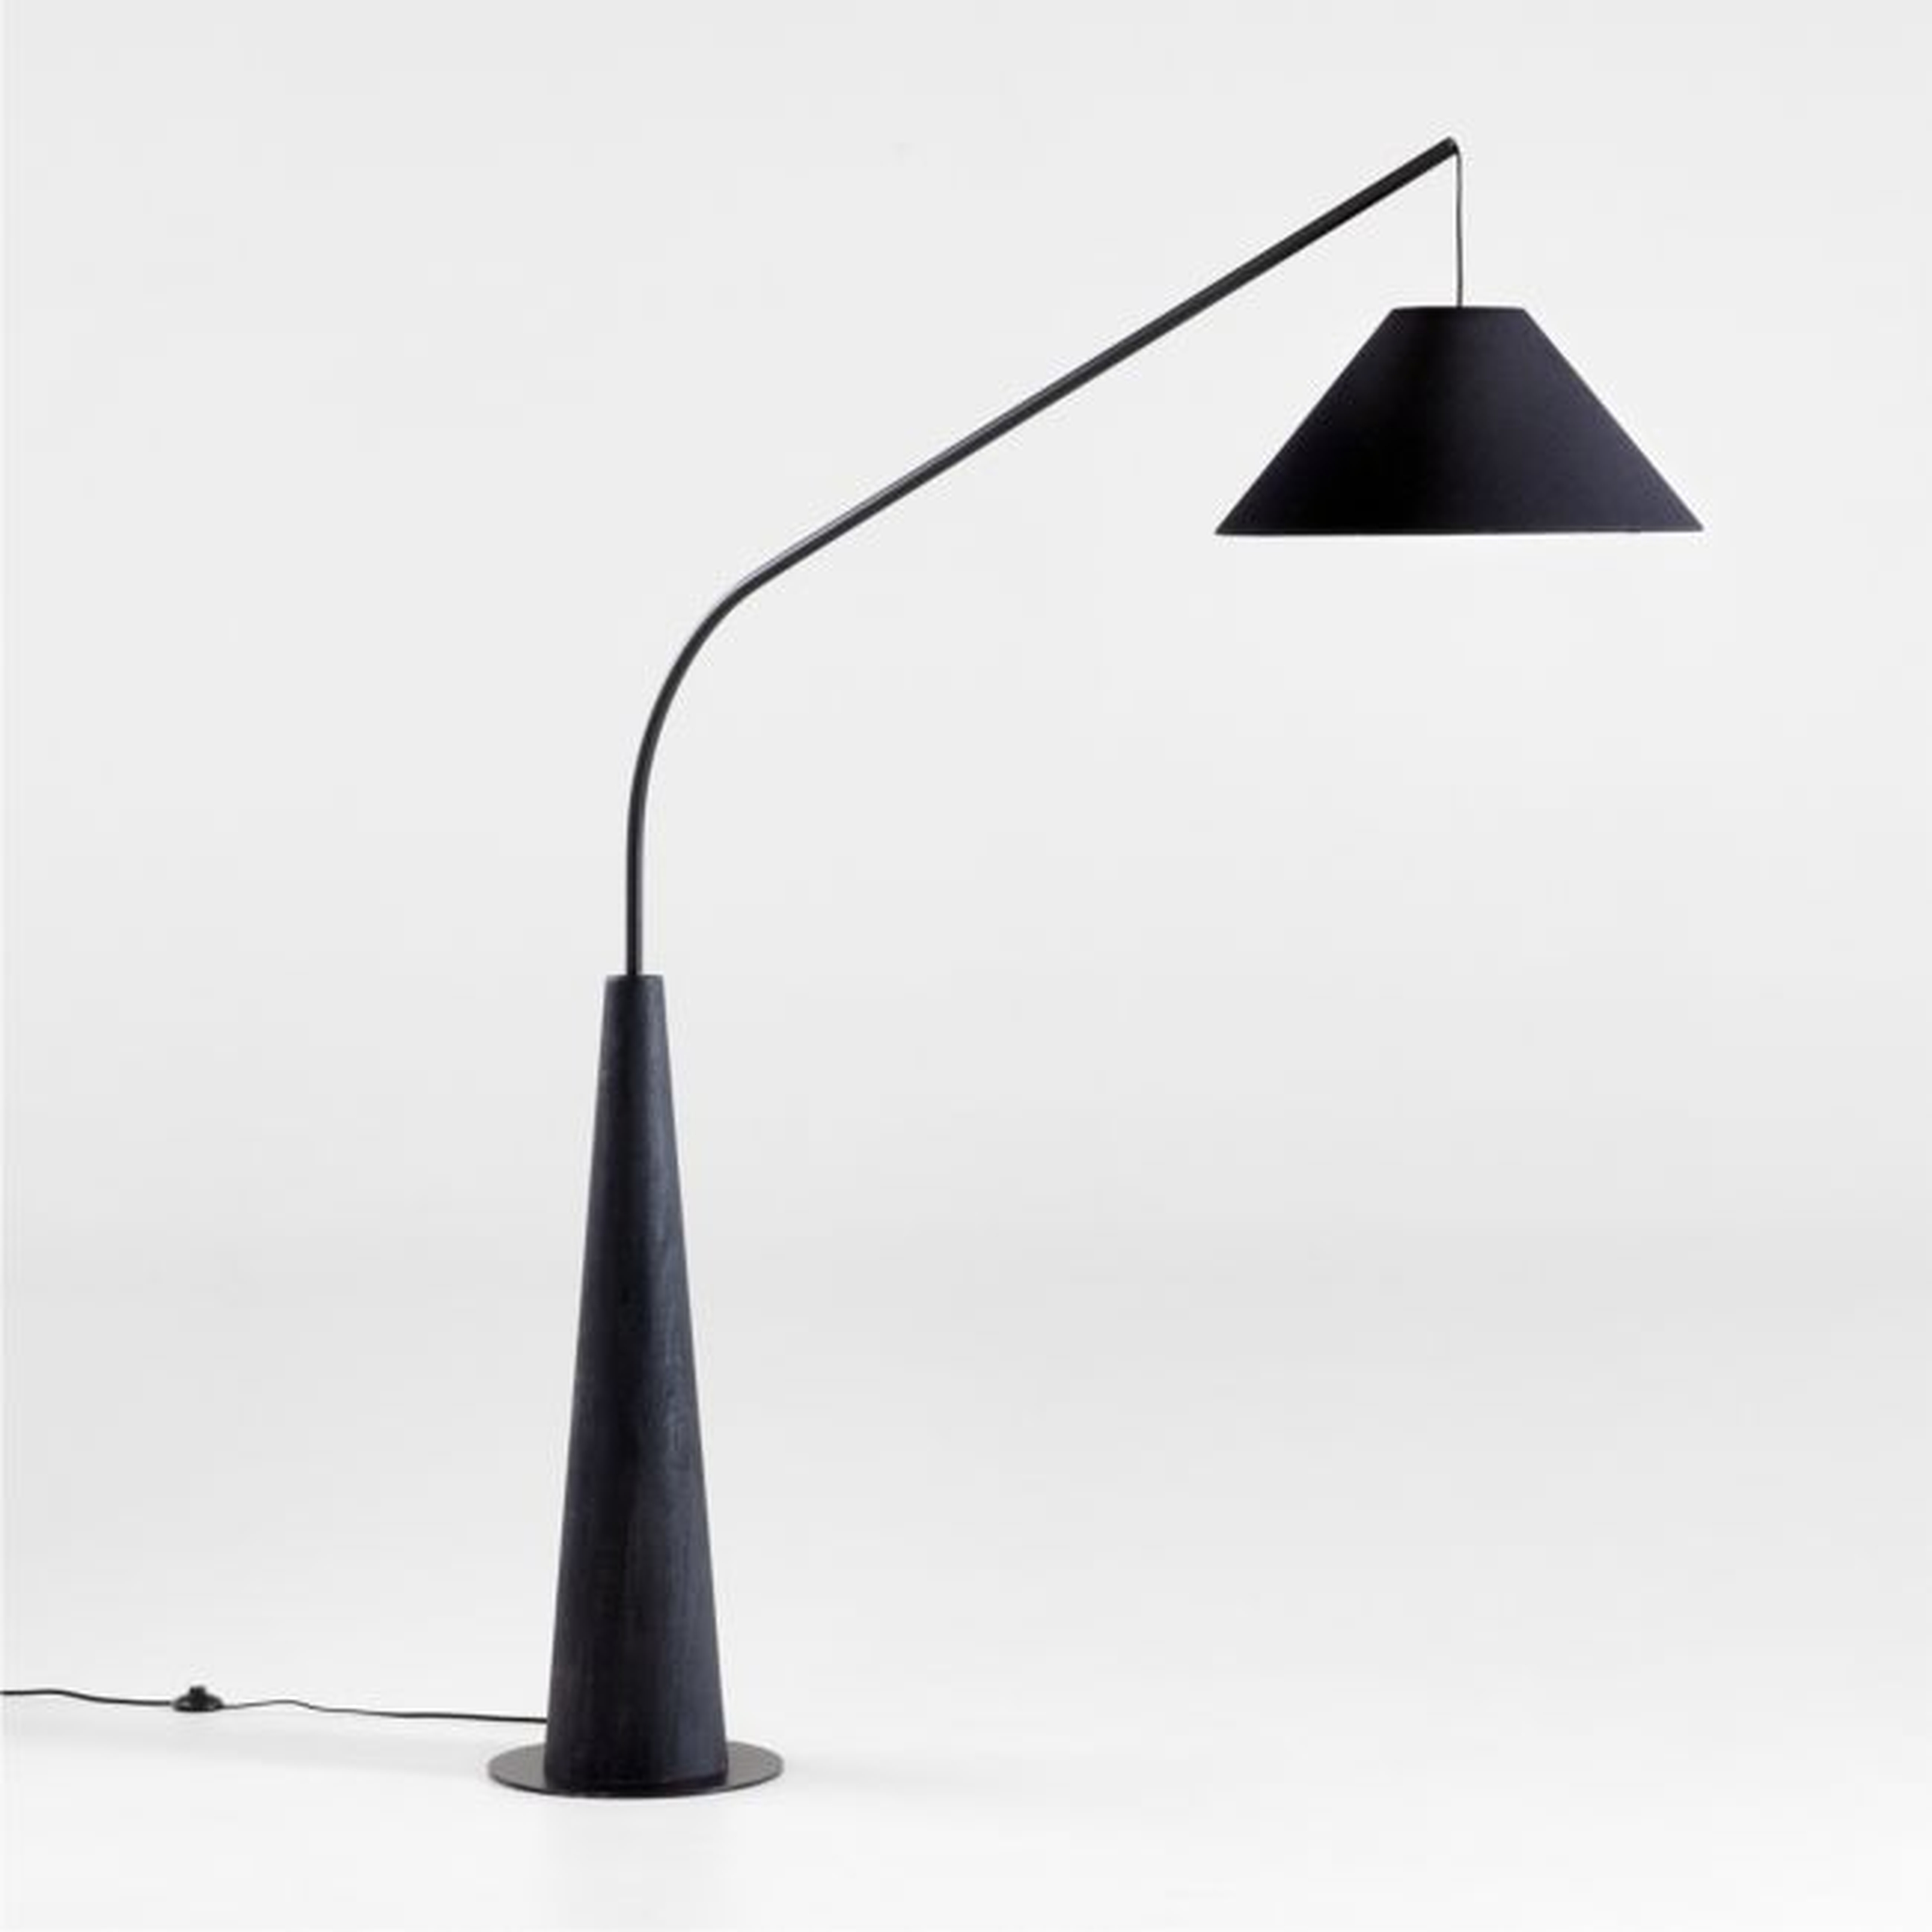 Gibson Hanging Arc Floor Lamp, Black Shade - Crate and Barrel